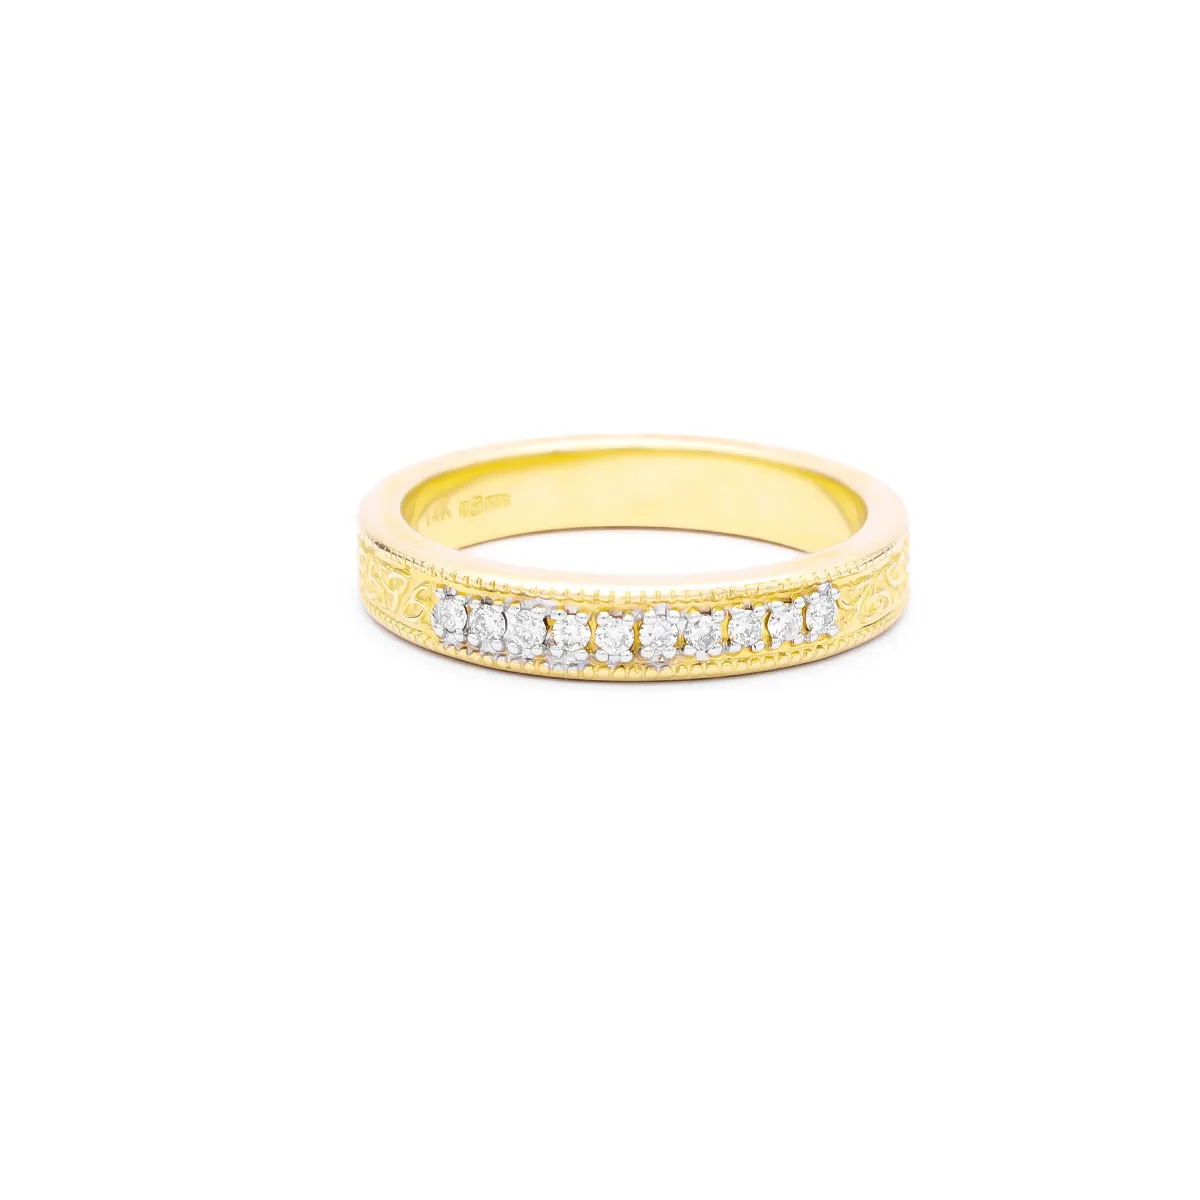 IJCR0040 Yellow Gold Celtic Ring With Diamonds 1